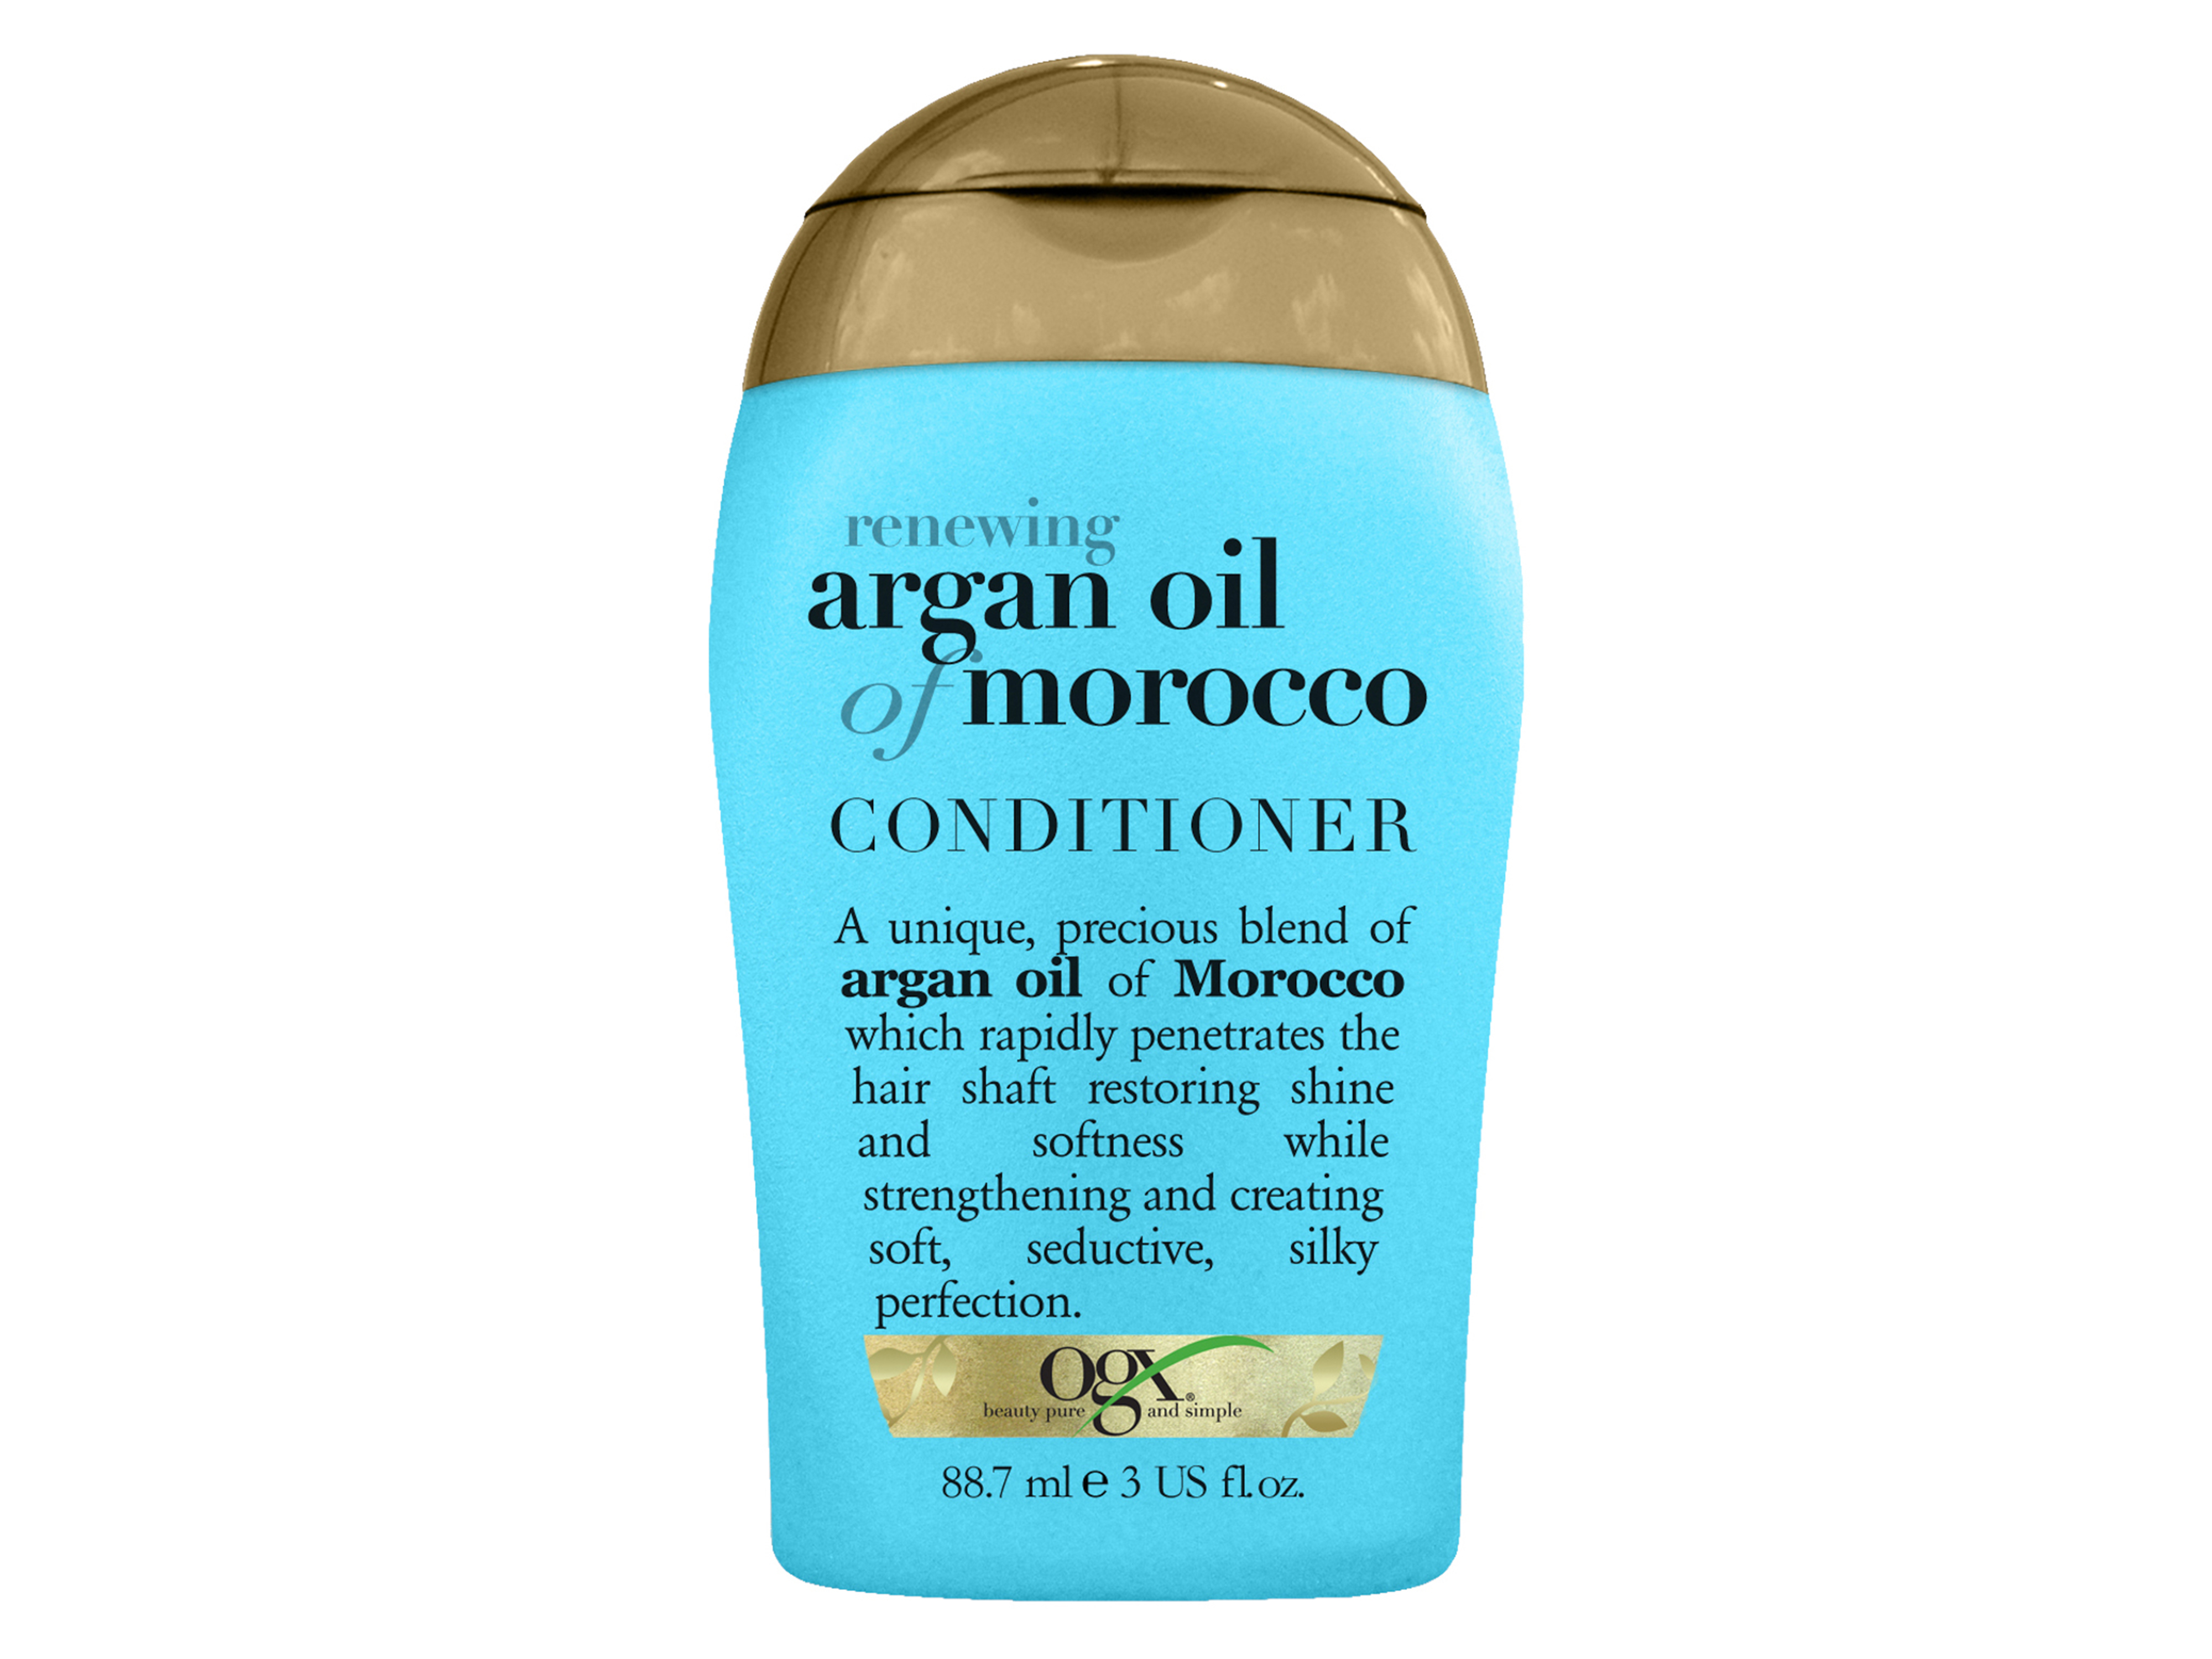 Ogx Argan Oil of Morocco Conditioner Travel Size, 88,7 ml